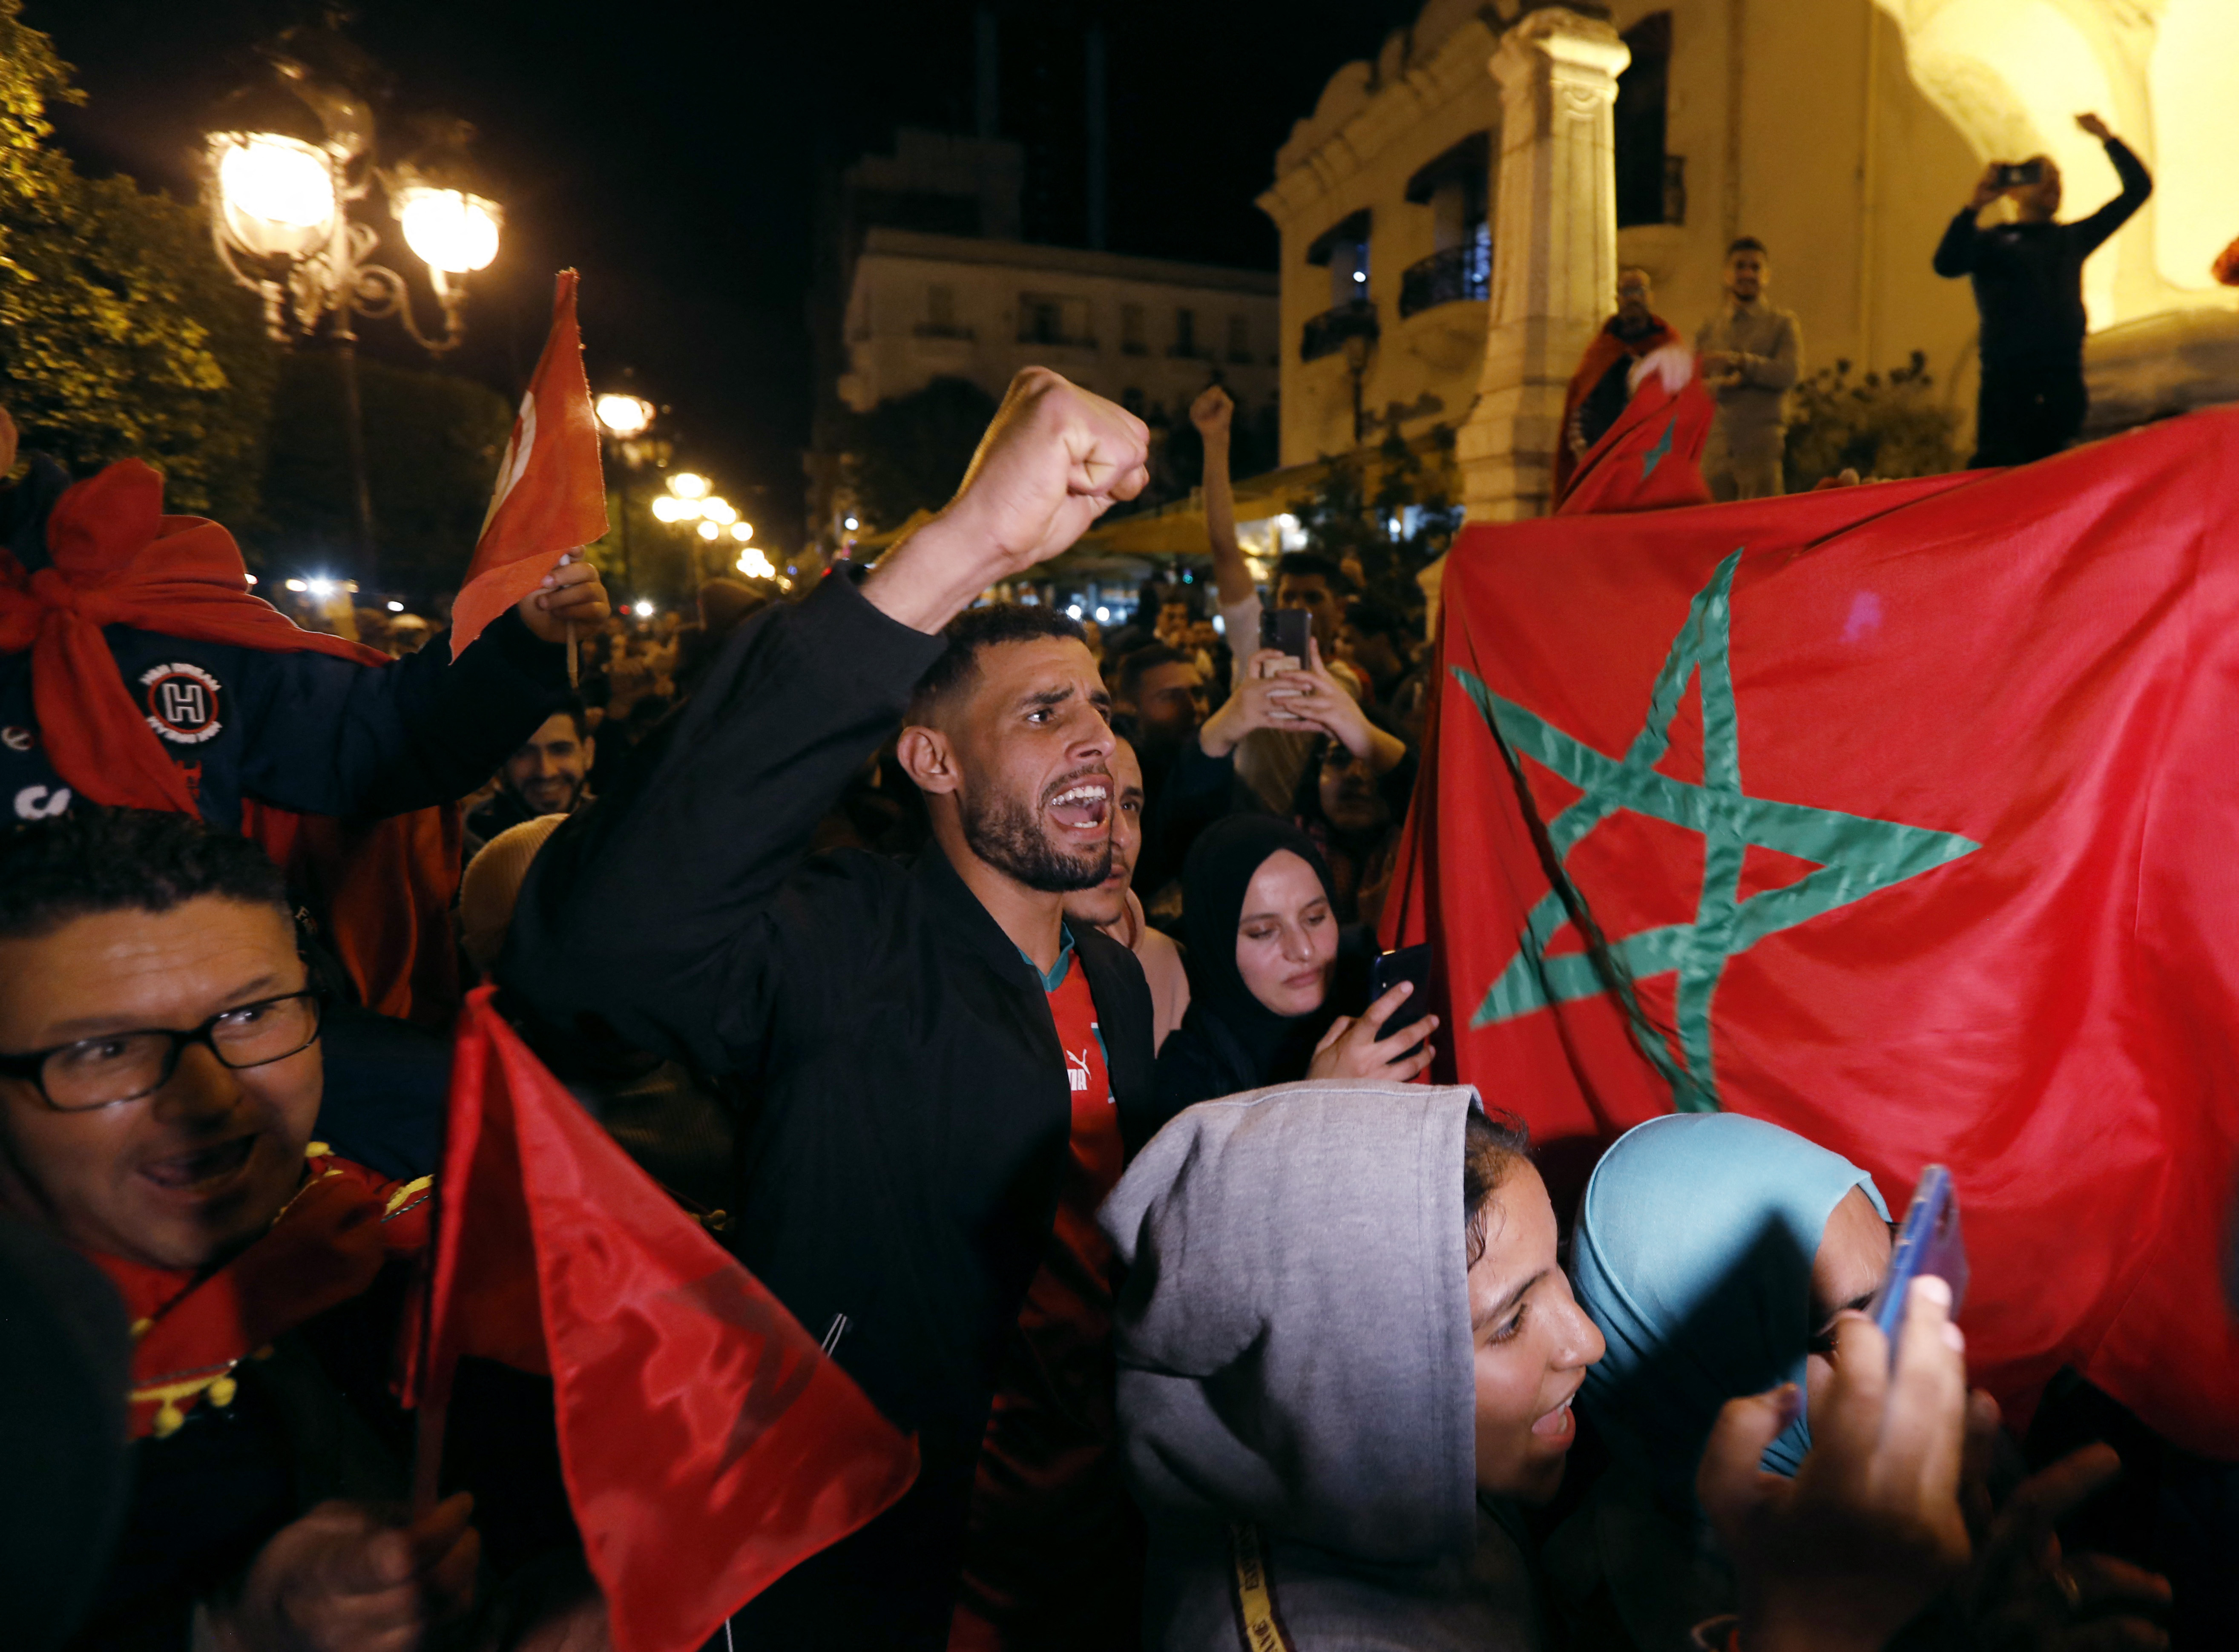 FIFA World Cup Qatar 2022 - Fans gather in Tunis for Morocco v Portugal